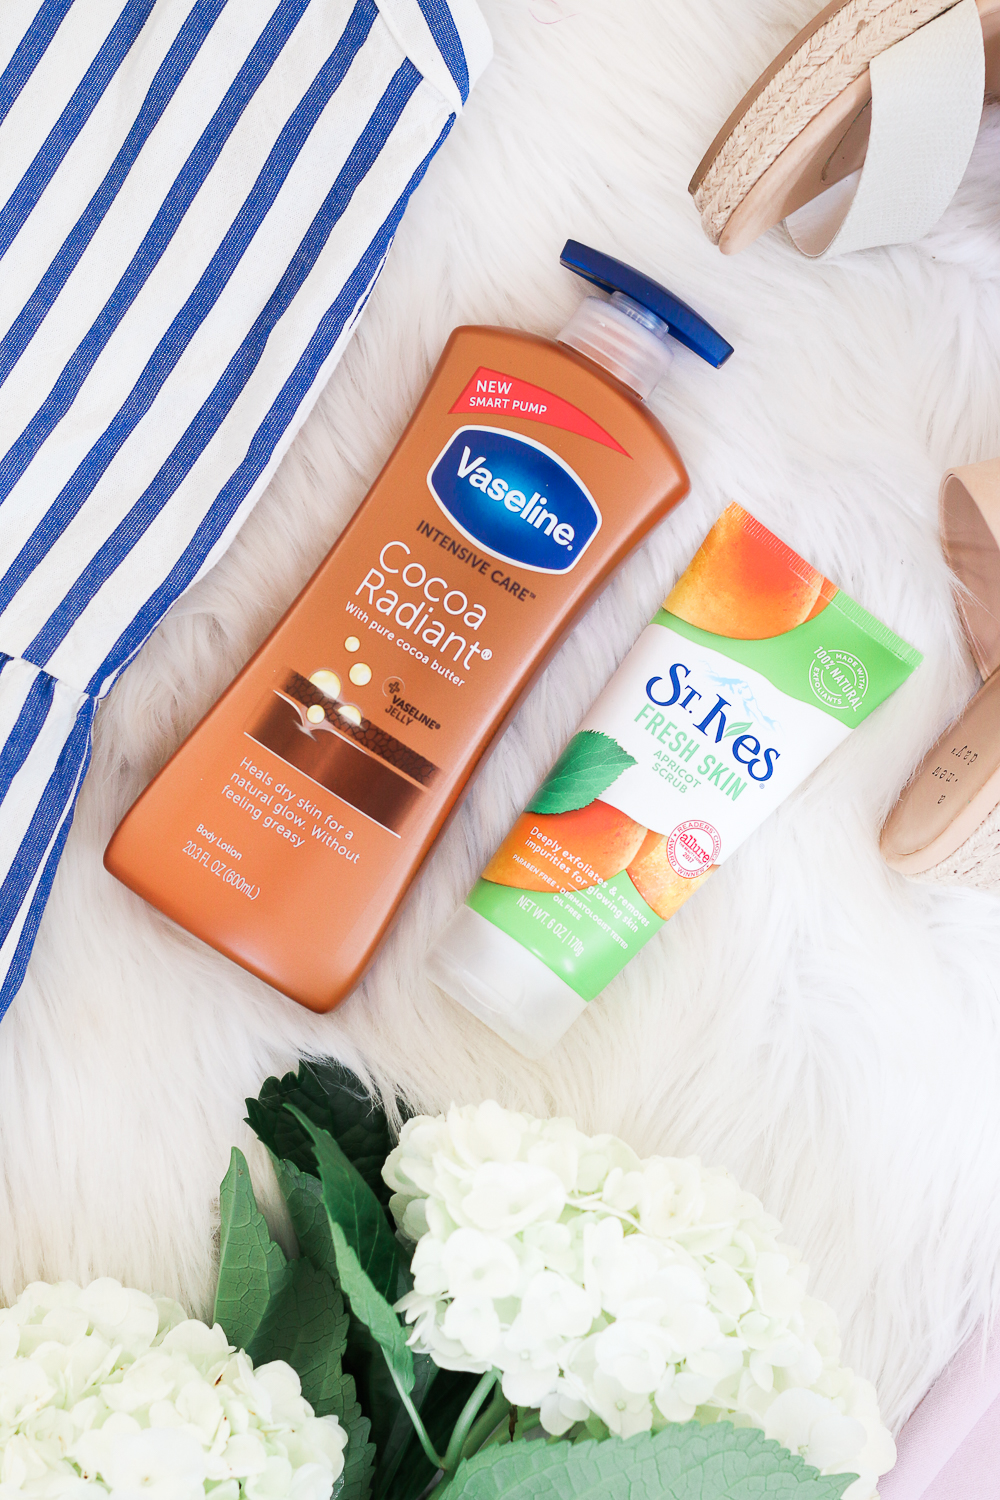 Target Spring Shopping Haul: Top Fashion and Beauty Finds by affordable fashion blogger Stephanie Ziajka from Diary of a Debutante, Vaseline Cocoa Radiant Lotion at Target, St. Ives Apricot Scrub at Target, Target Universal Thread Blue Sleeveless U-Neck Midi Tiered Dress